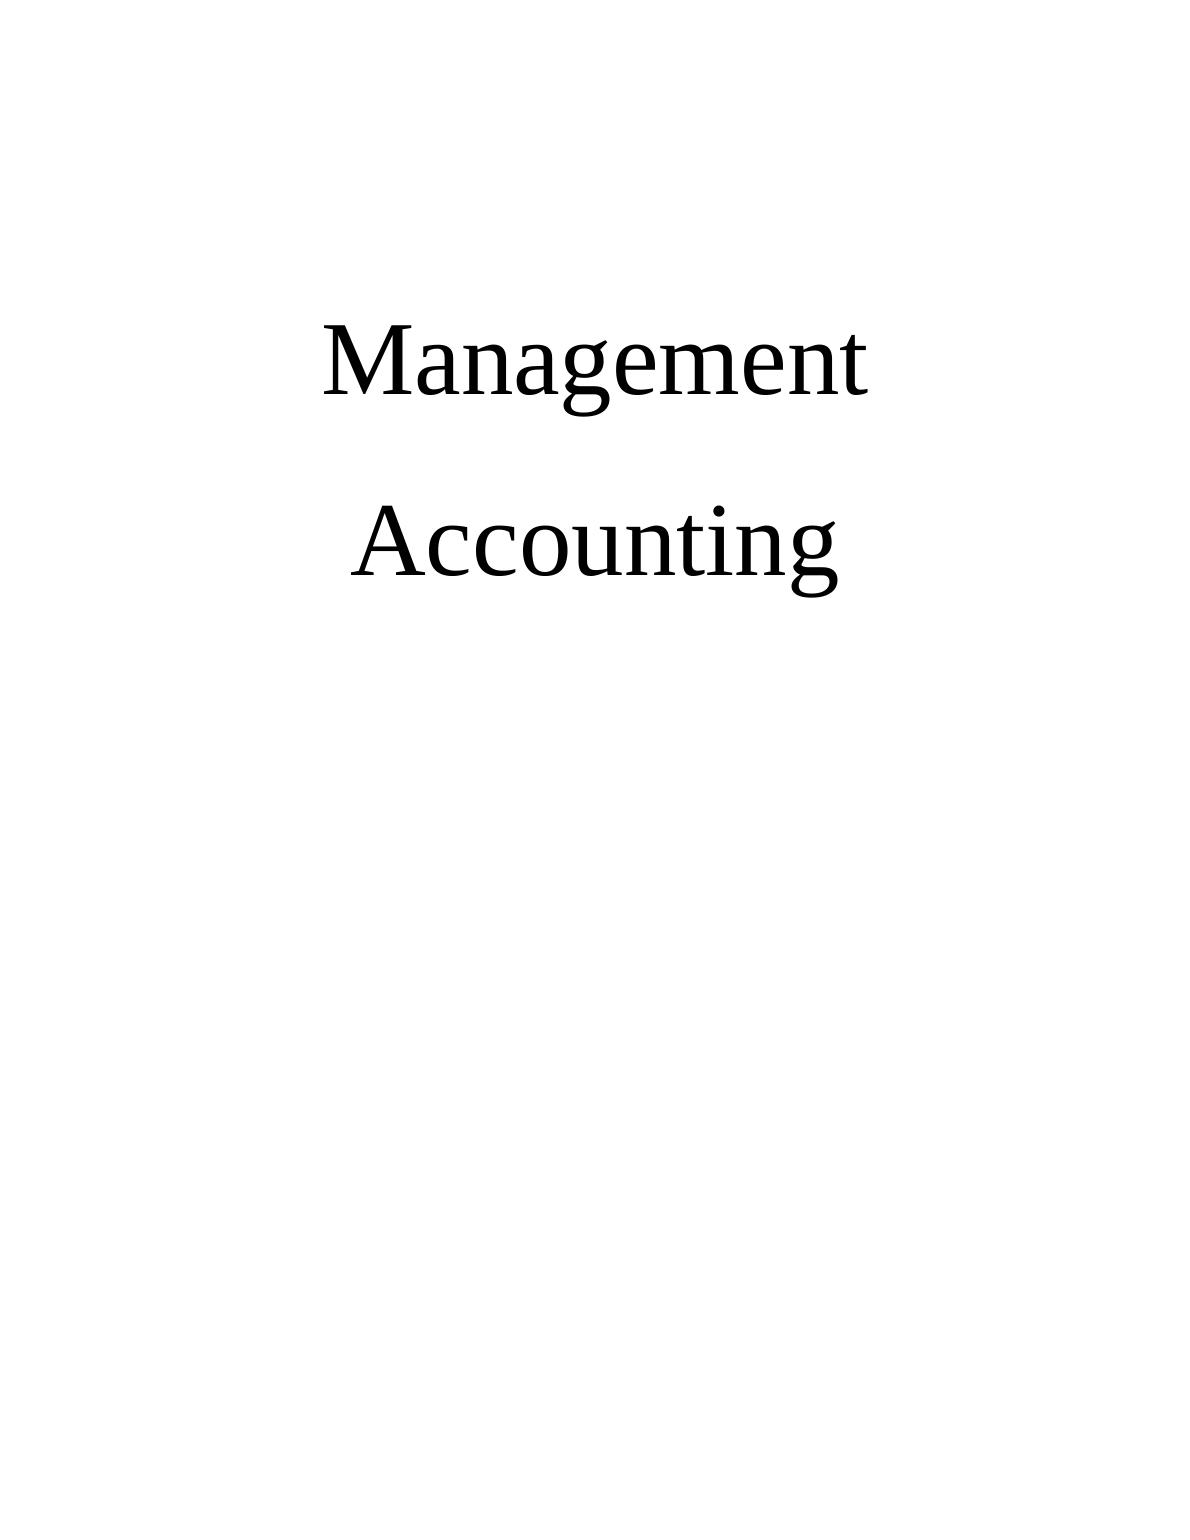 Management Accounting Systems and Methods of Budget Control_1